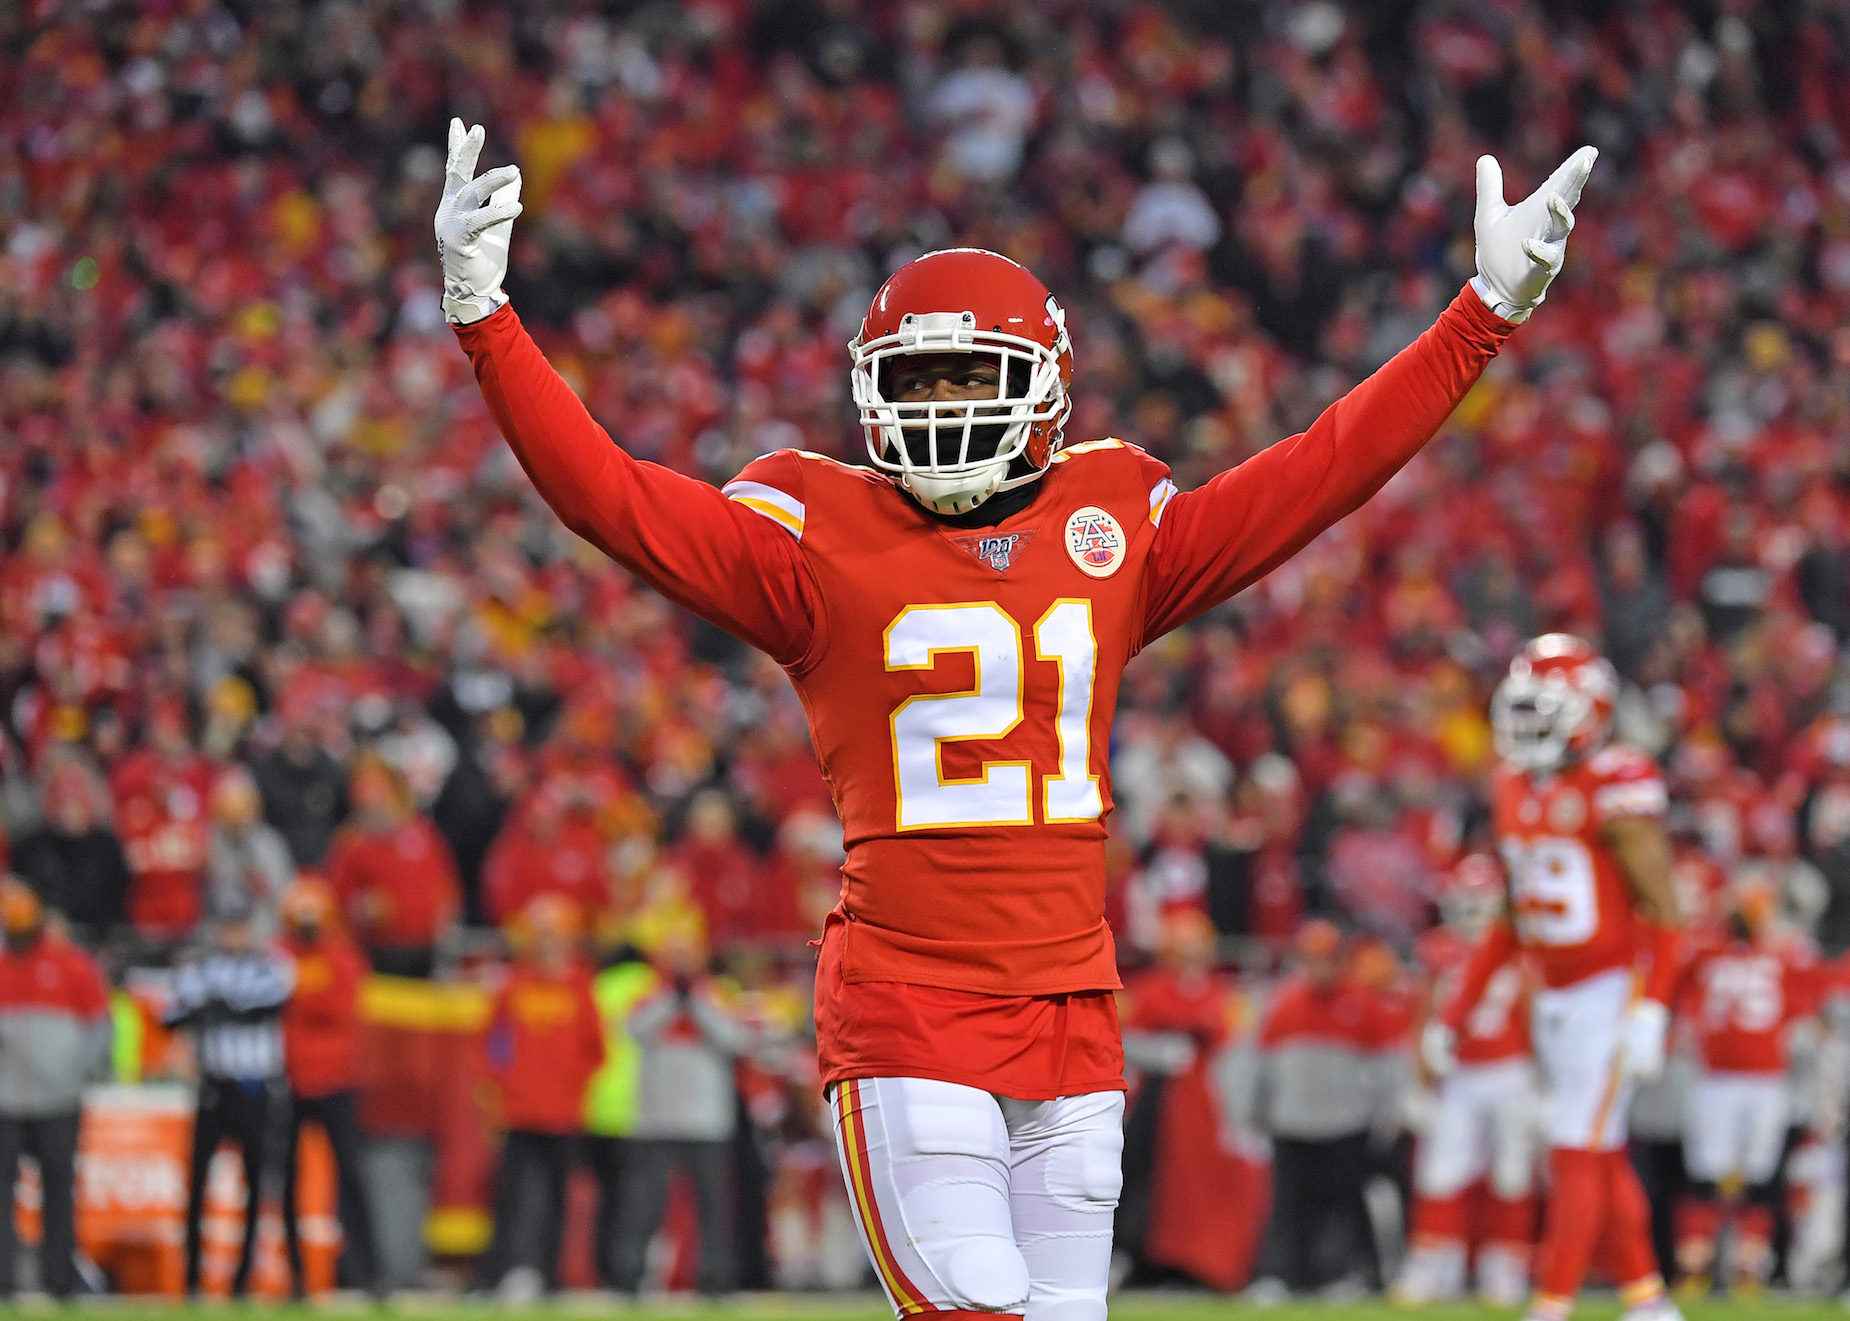 While Patrick Mahomes and the Kansas City Chiefs offense gets all the headlines, the club wil gain an invaluable defensive reinforcement in Week 5.